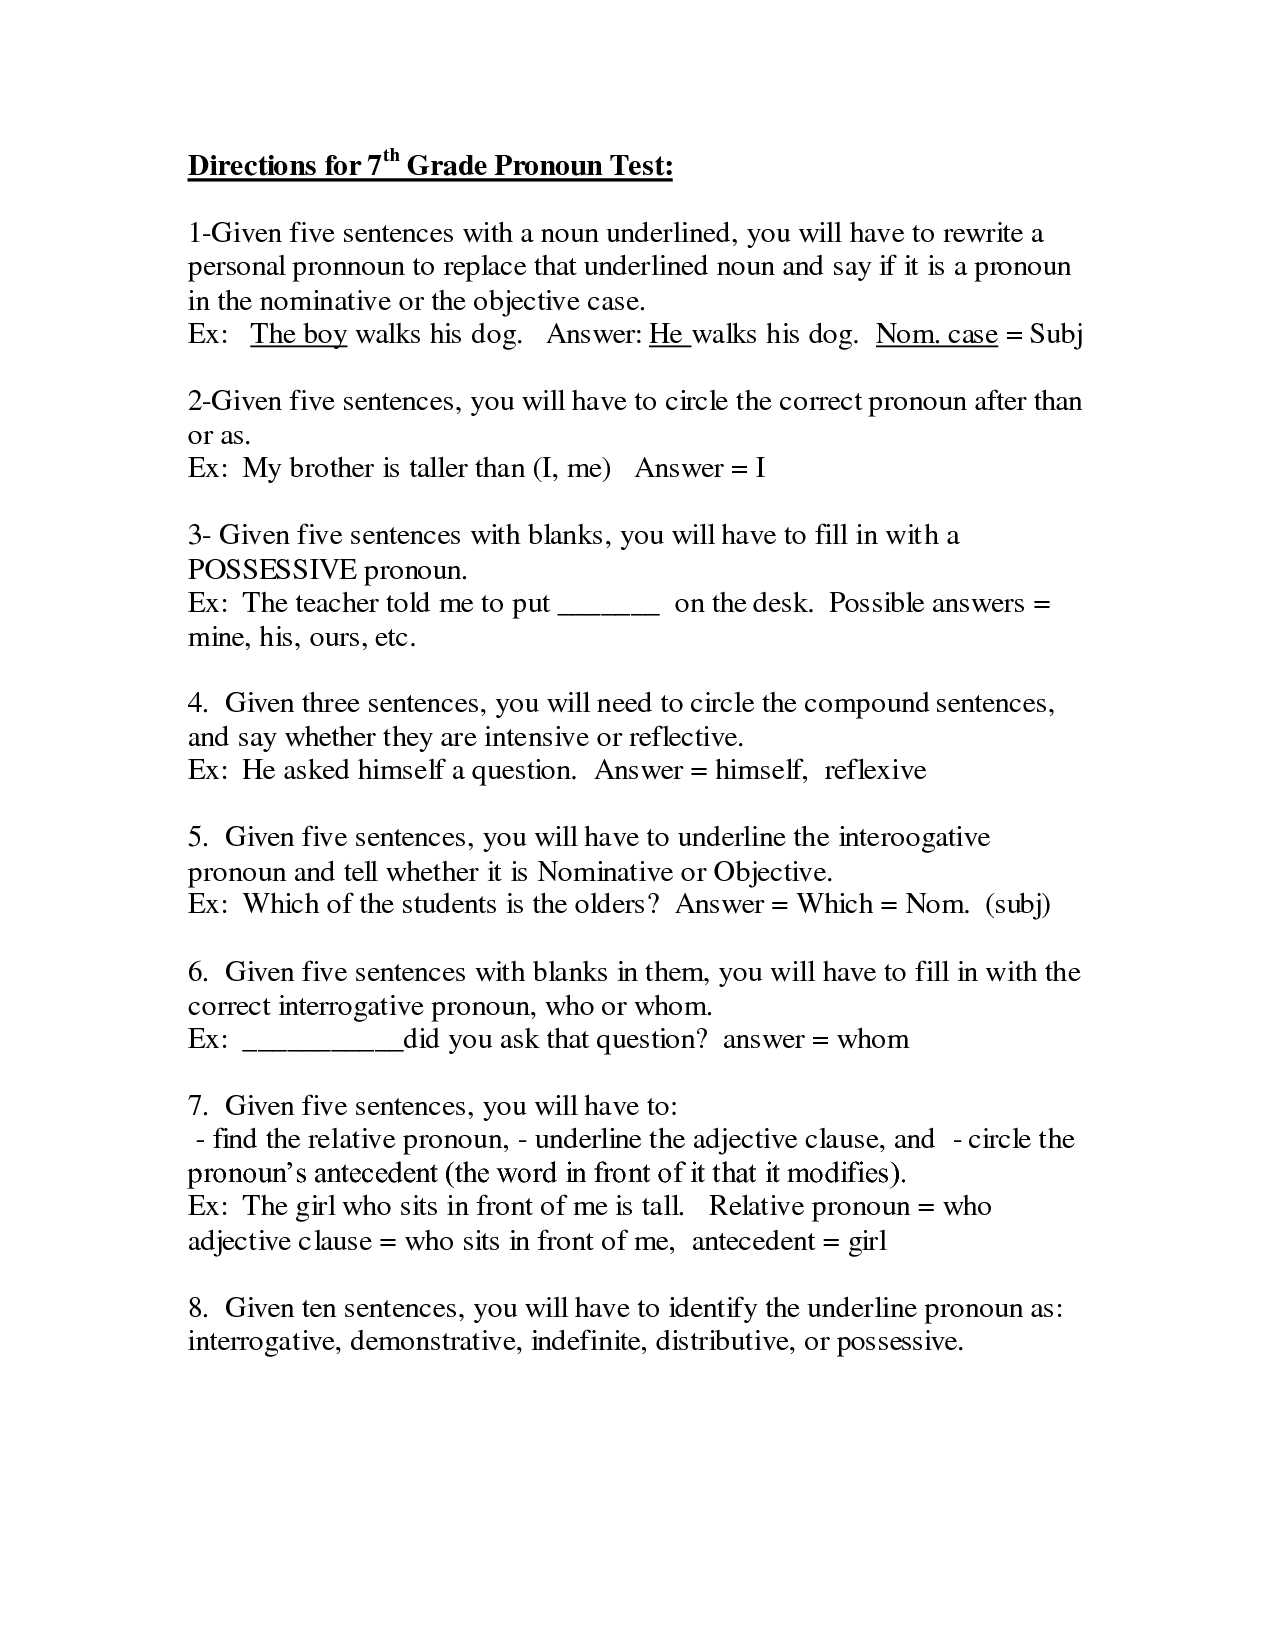 Proportional Reasoning Worksheet together with 7th Grade Math Work Beautiful 7th Grade English Worksheets Printable